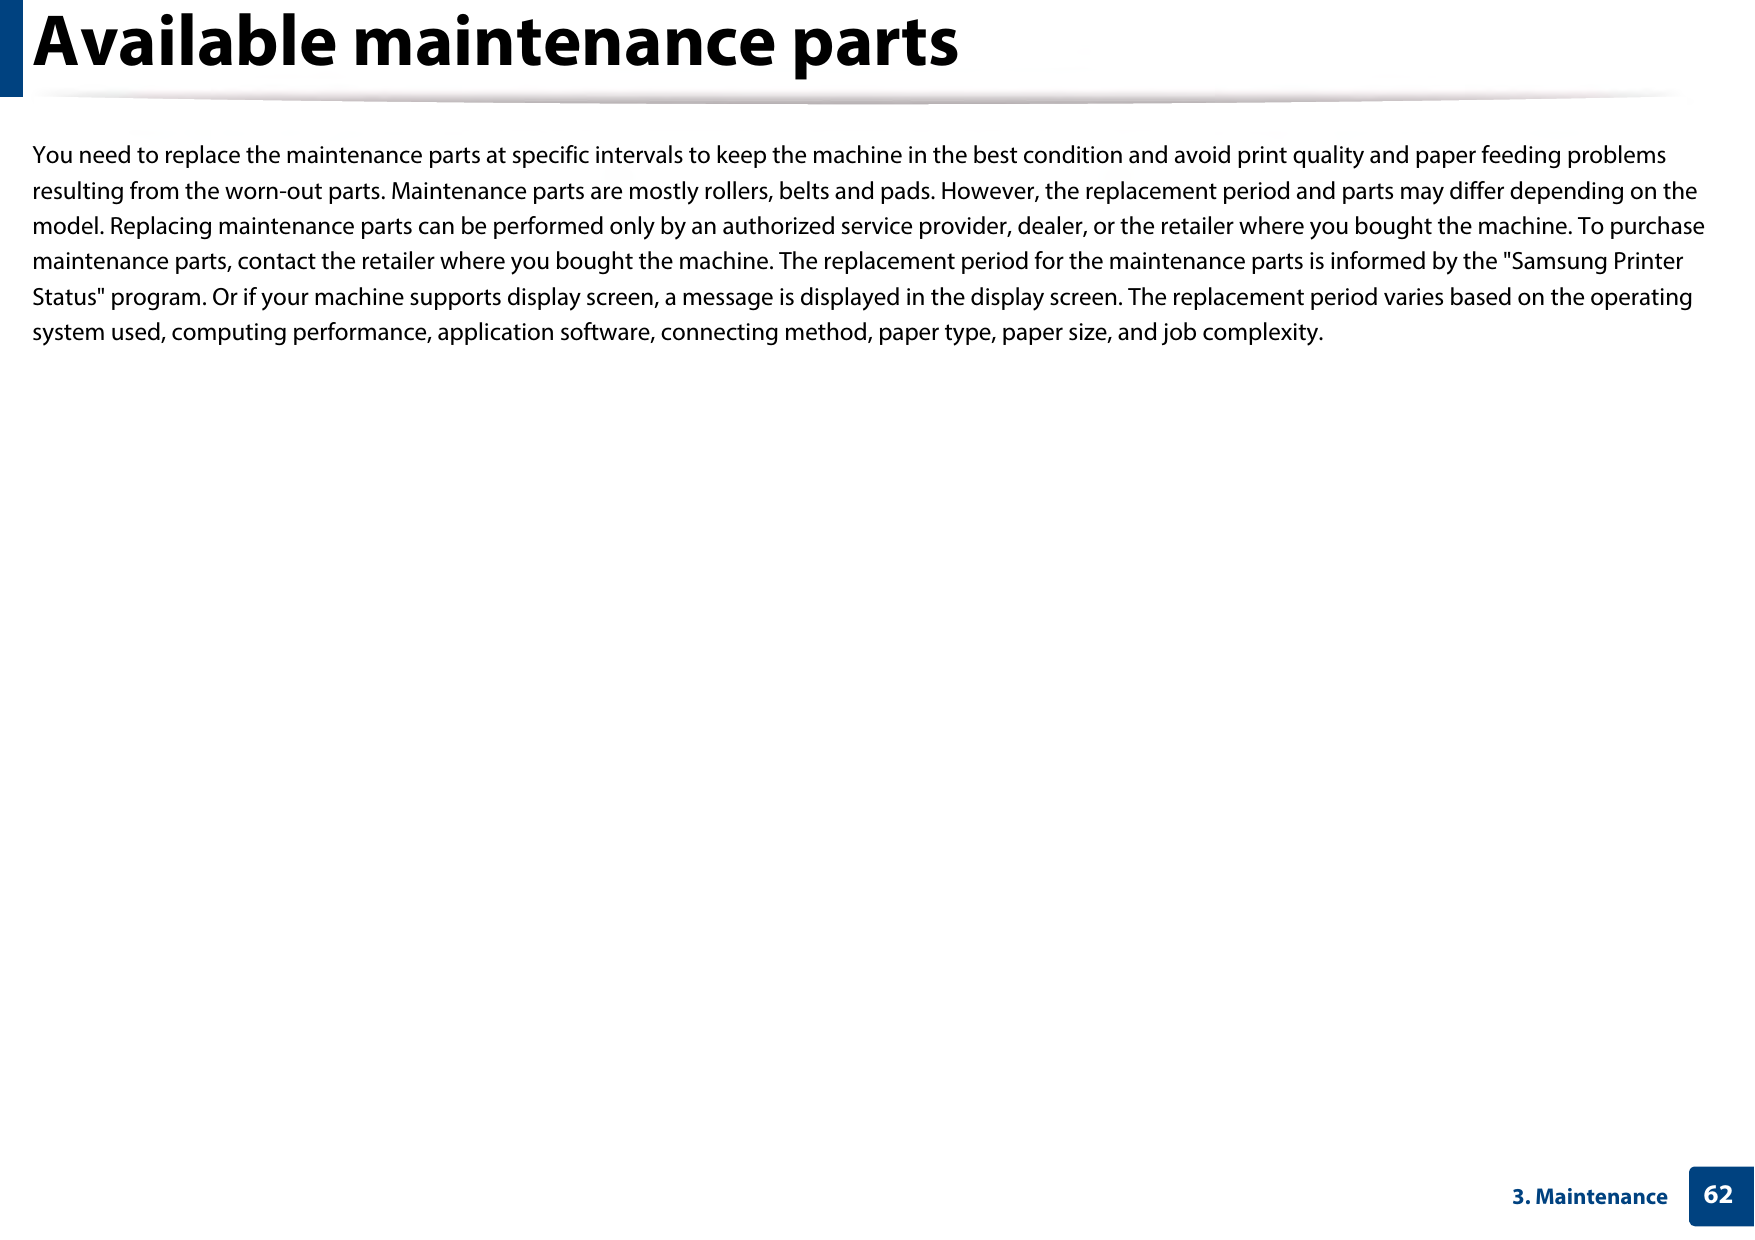 623. MaintenanceAvailable maintenance partsYou need to replace the maintenance parts at specific intervals to keep the machine in the best condition and avoid print quality and paper feeding problems resulting from the worn-out parts. Maintenance parts are mostly rollers, belts and pads. However, the replacement period and parts may differ depending on the model. Replacing maintenance parts can be performed only by an authorized service provider, dealer, or the retailer where you bought the machine. To purchase maintenance parts, contact the retailer where you bought the machine. The replacement period for the maintenance parts is informed by the &quot;Samsung Printer Status&quot; program. Or if your machine supports display screen, a message is displayed in the display screen. The replacement period varies based on the operating system used, computing performance, application software, connecting method, paper type, paper size, and job complexity.